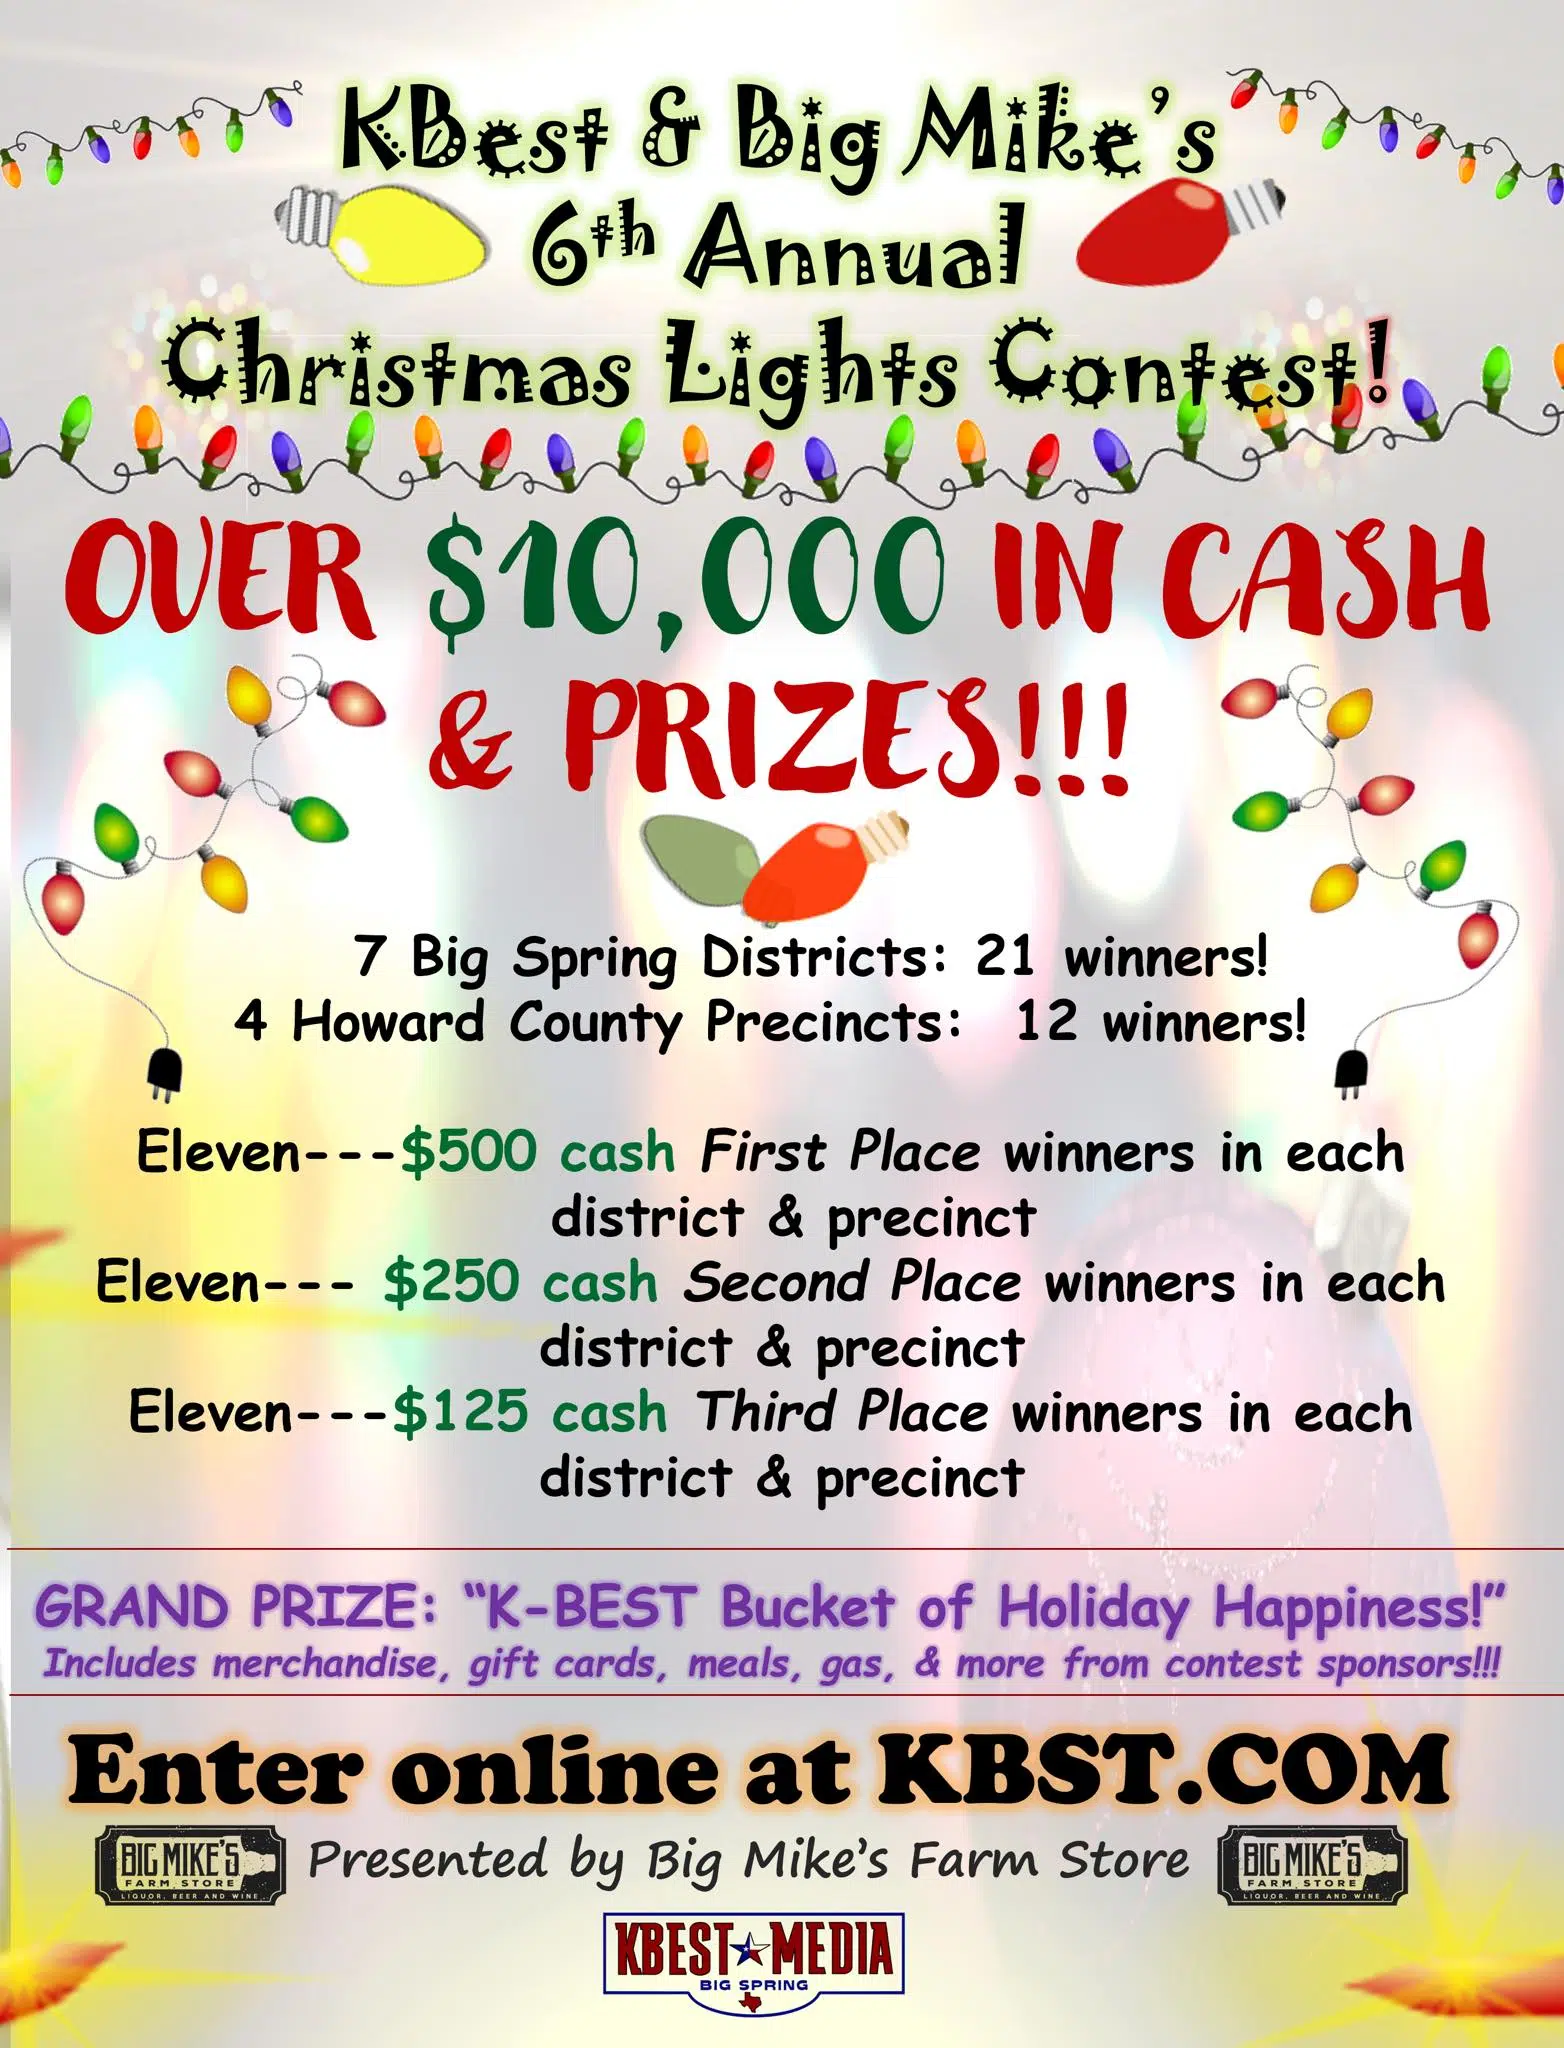 Keep Your Christmas Lights Lit With Light Keeper Pro ~ Giveaway -  TheSuburbanMom